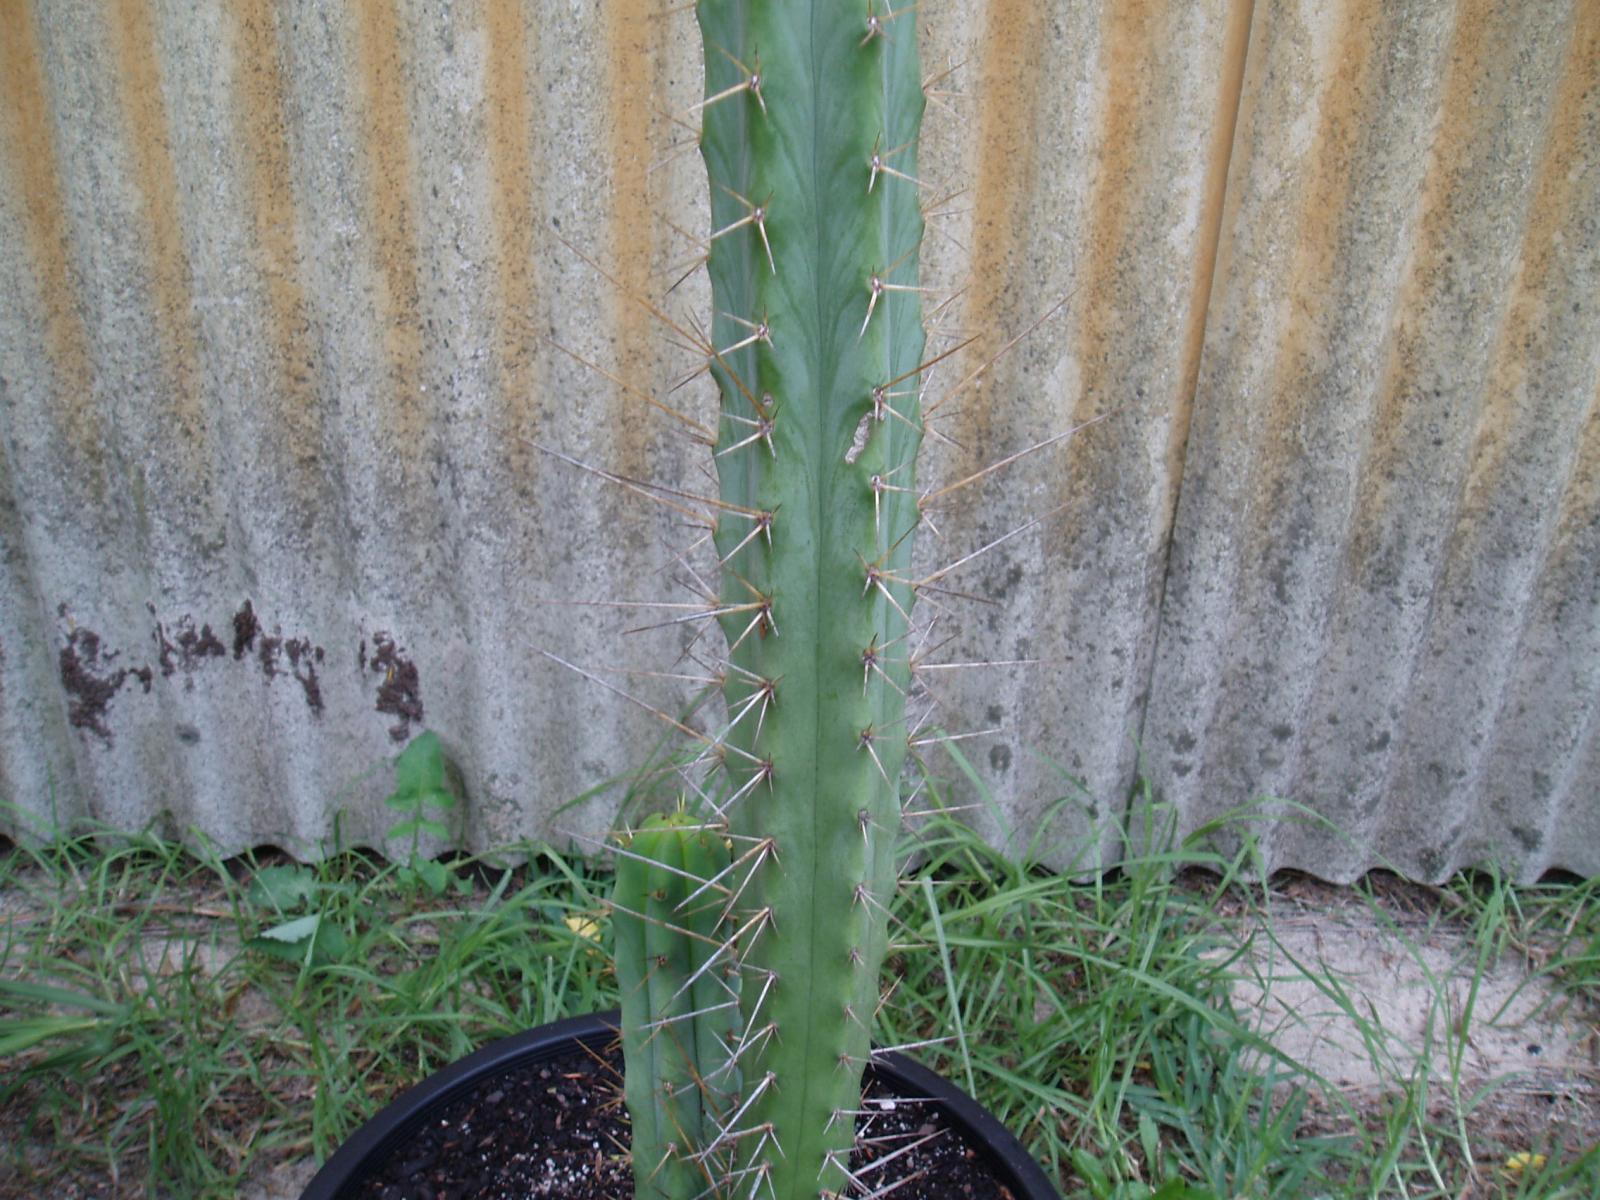 Another seed grown bridgesii with interesting spines